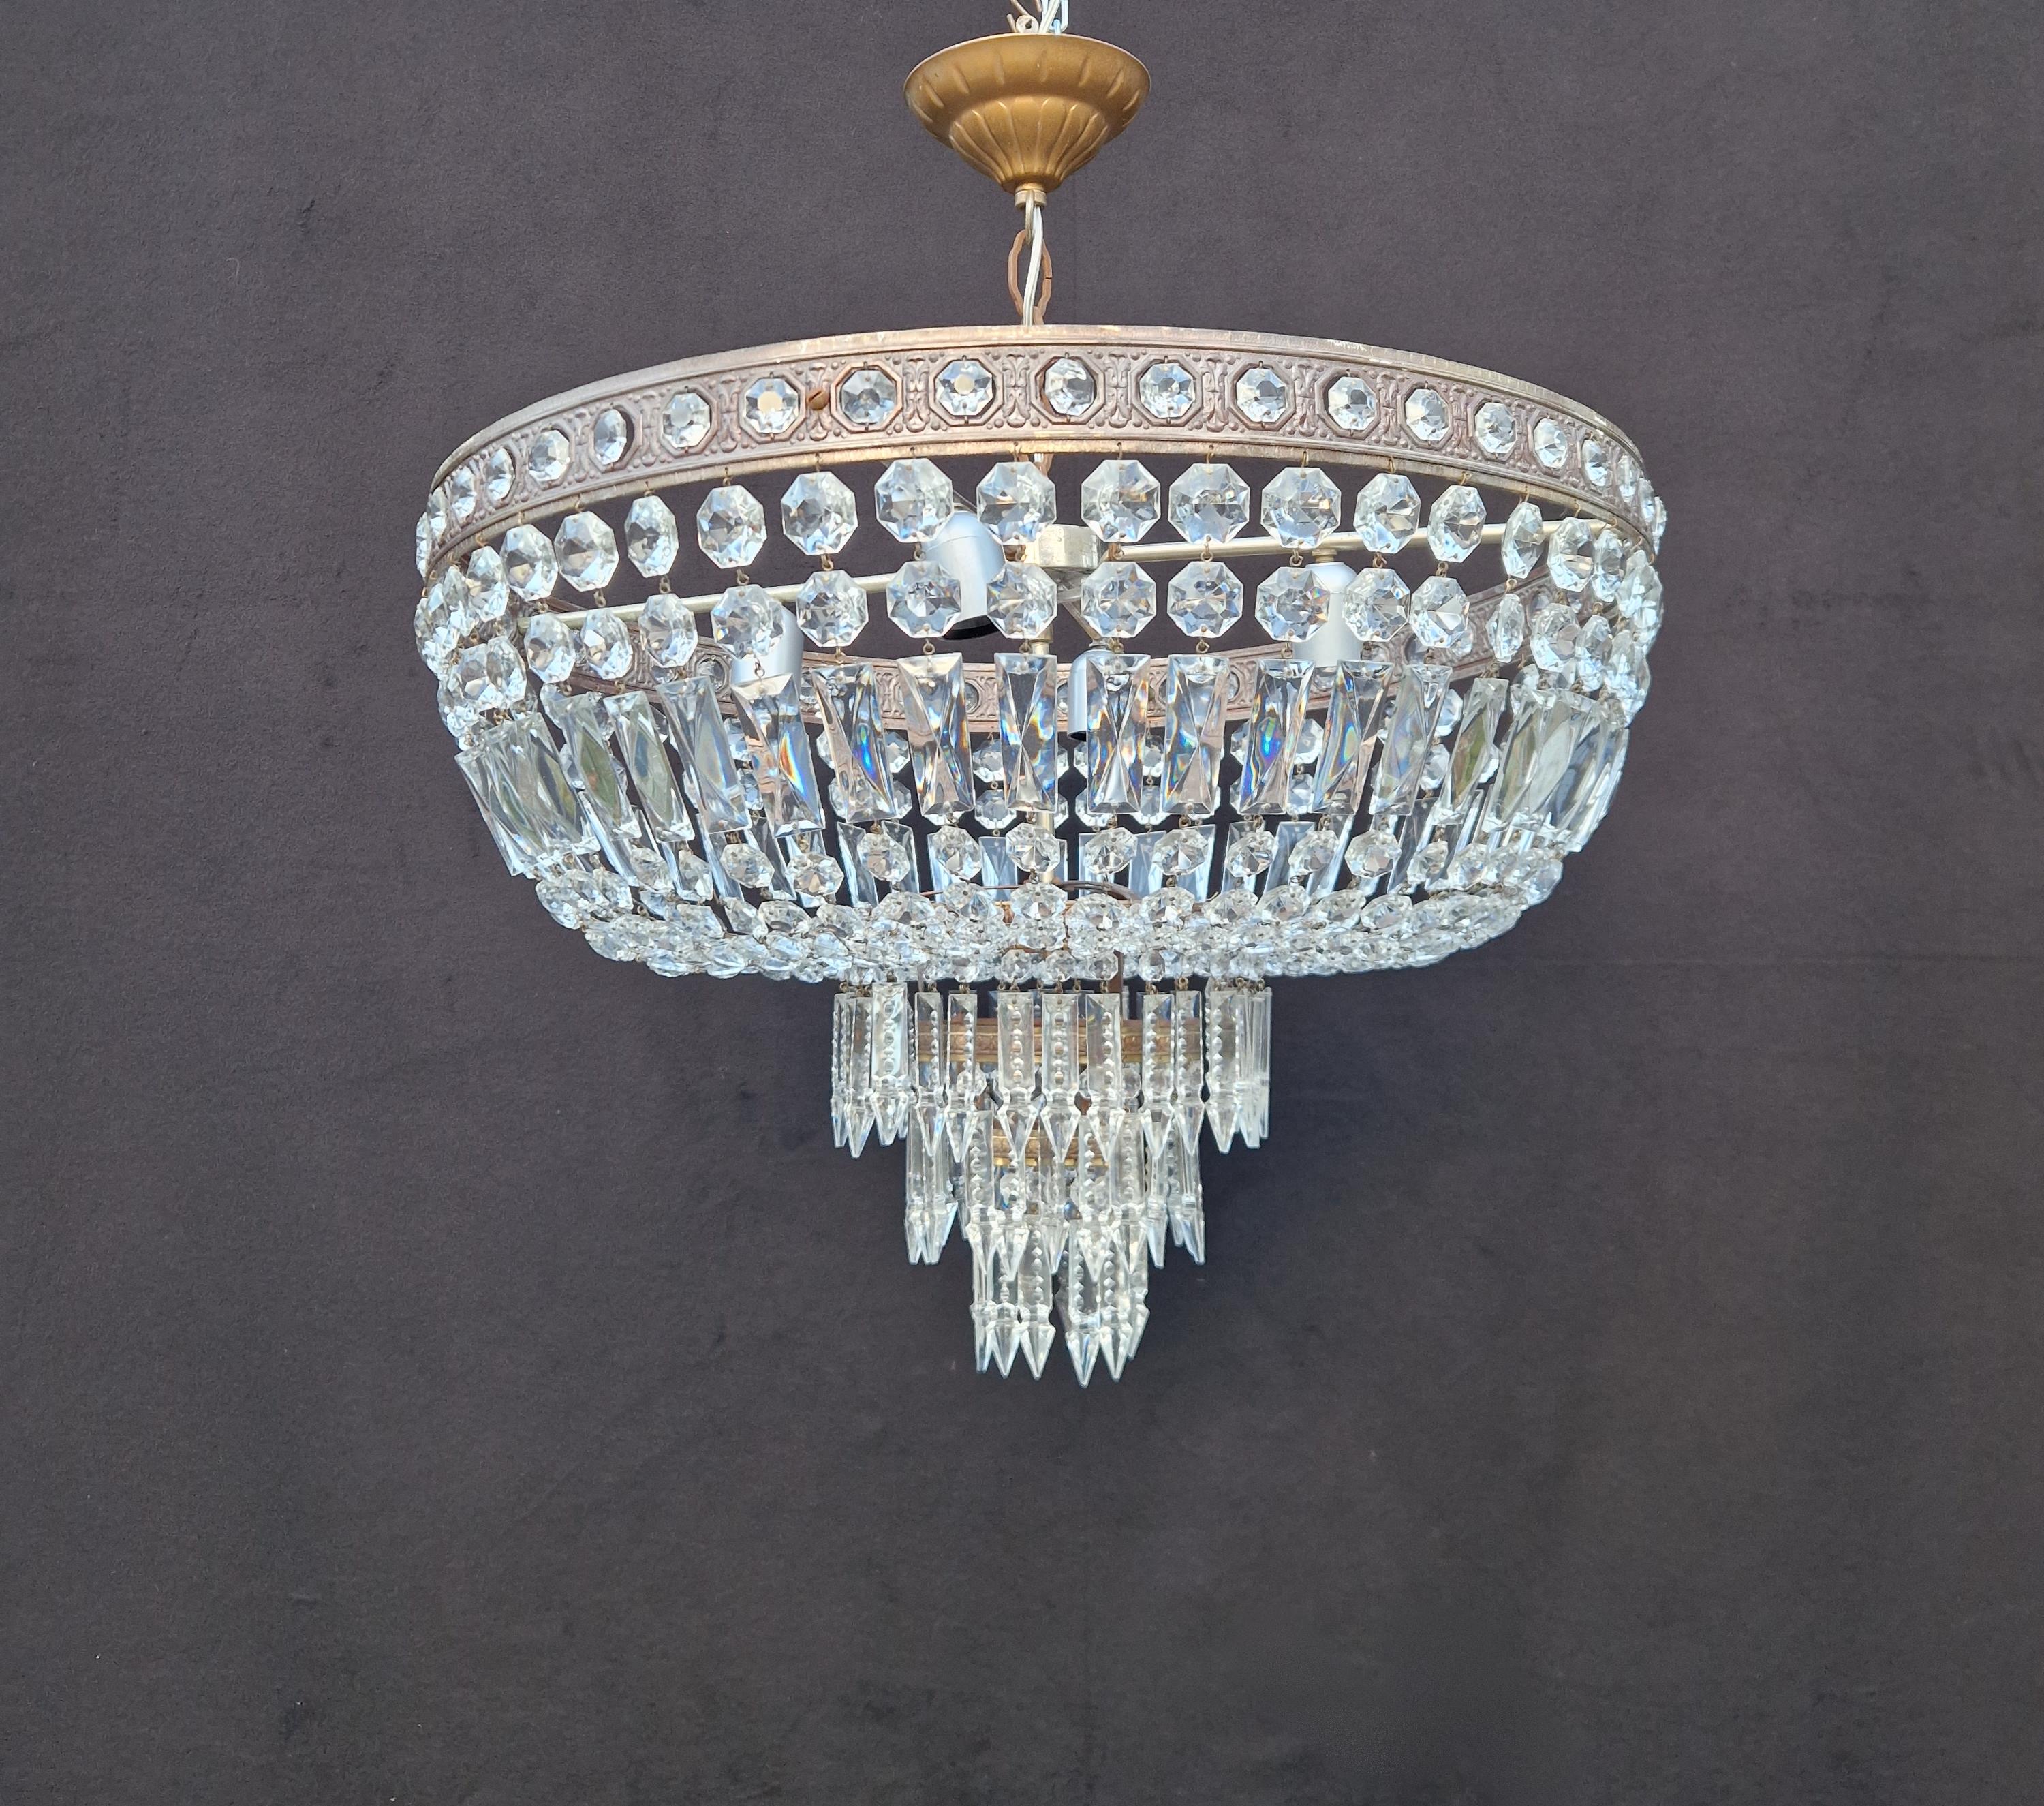 Introducing our cherished old chandelier, lovingly and professionally restored in Berlin. Its electrical wiring is fully compatible with the US, as it has been re-wired and is ready to hang. Not a single crystal is missing, and each one has been